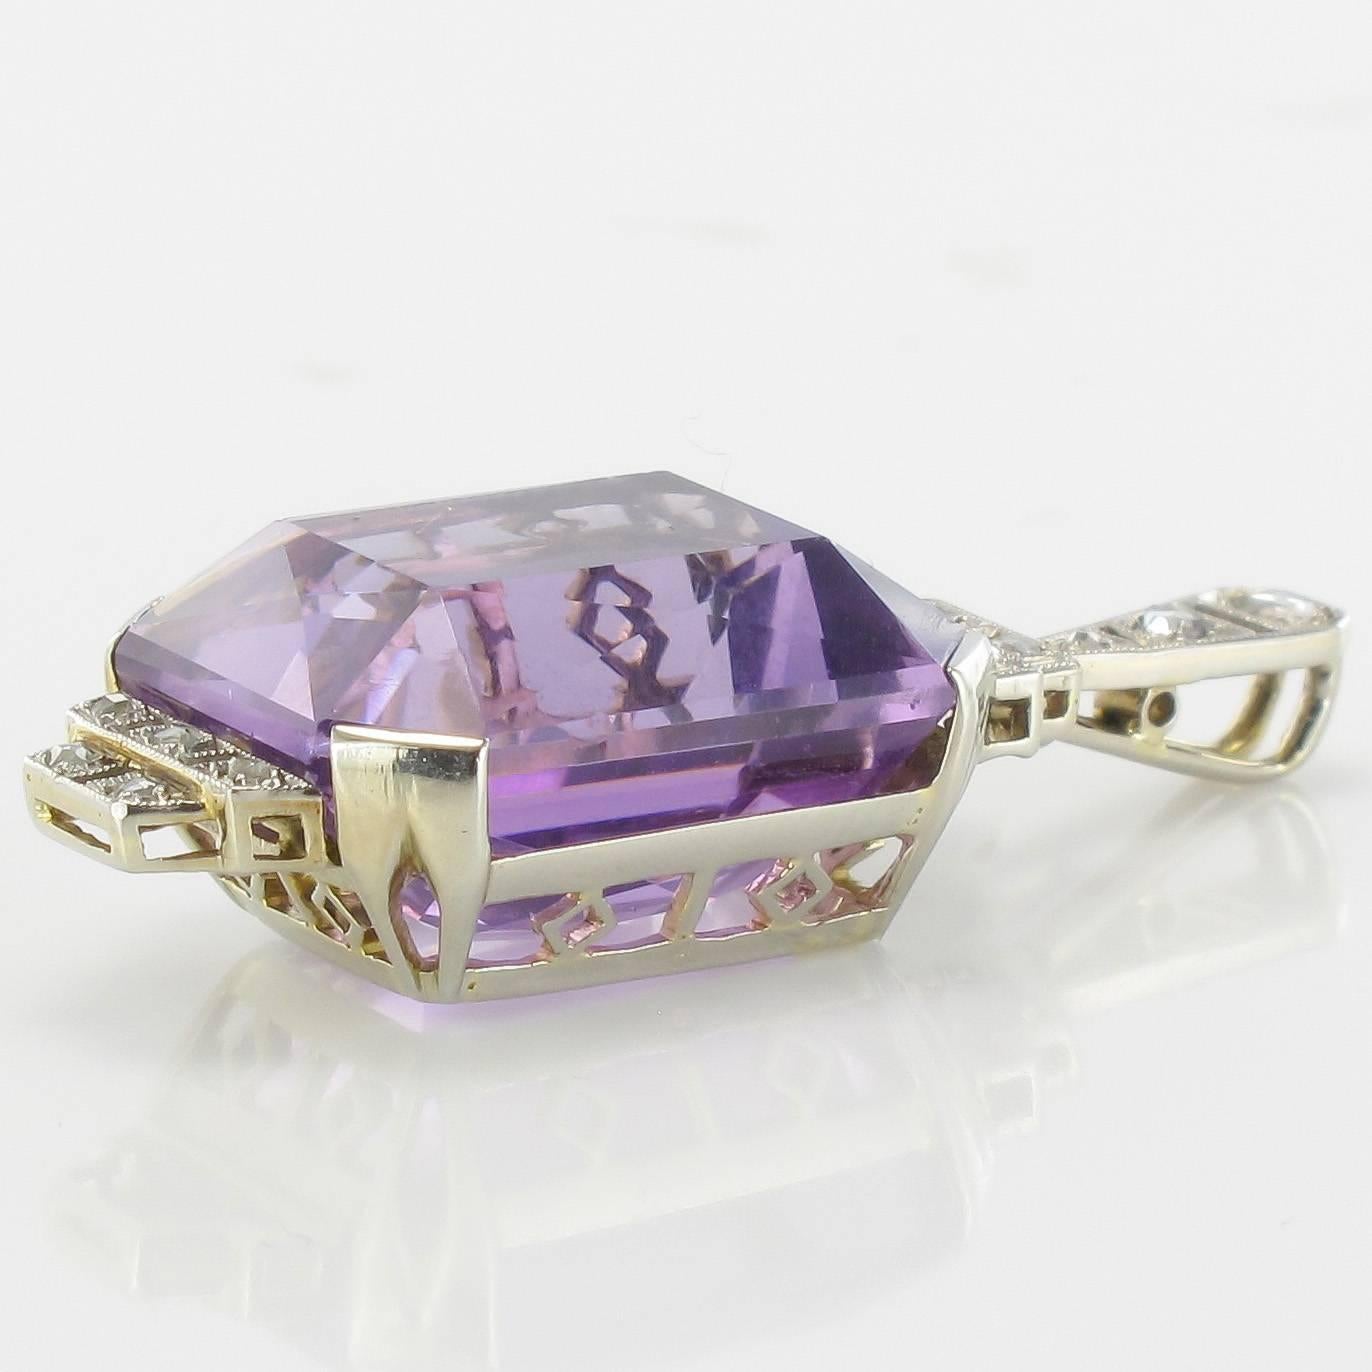 Platinum pendant and 18 carat white gold, dog and eagle head hallmarks.

This magnificent Art Deco pendant necklace has a geometric shaped design claw set with an emerald cut amethyst and rose cut diamonds, including in the bail itself. 
The setting